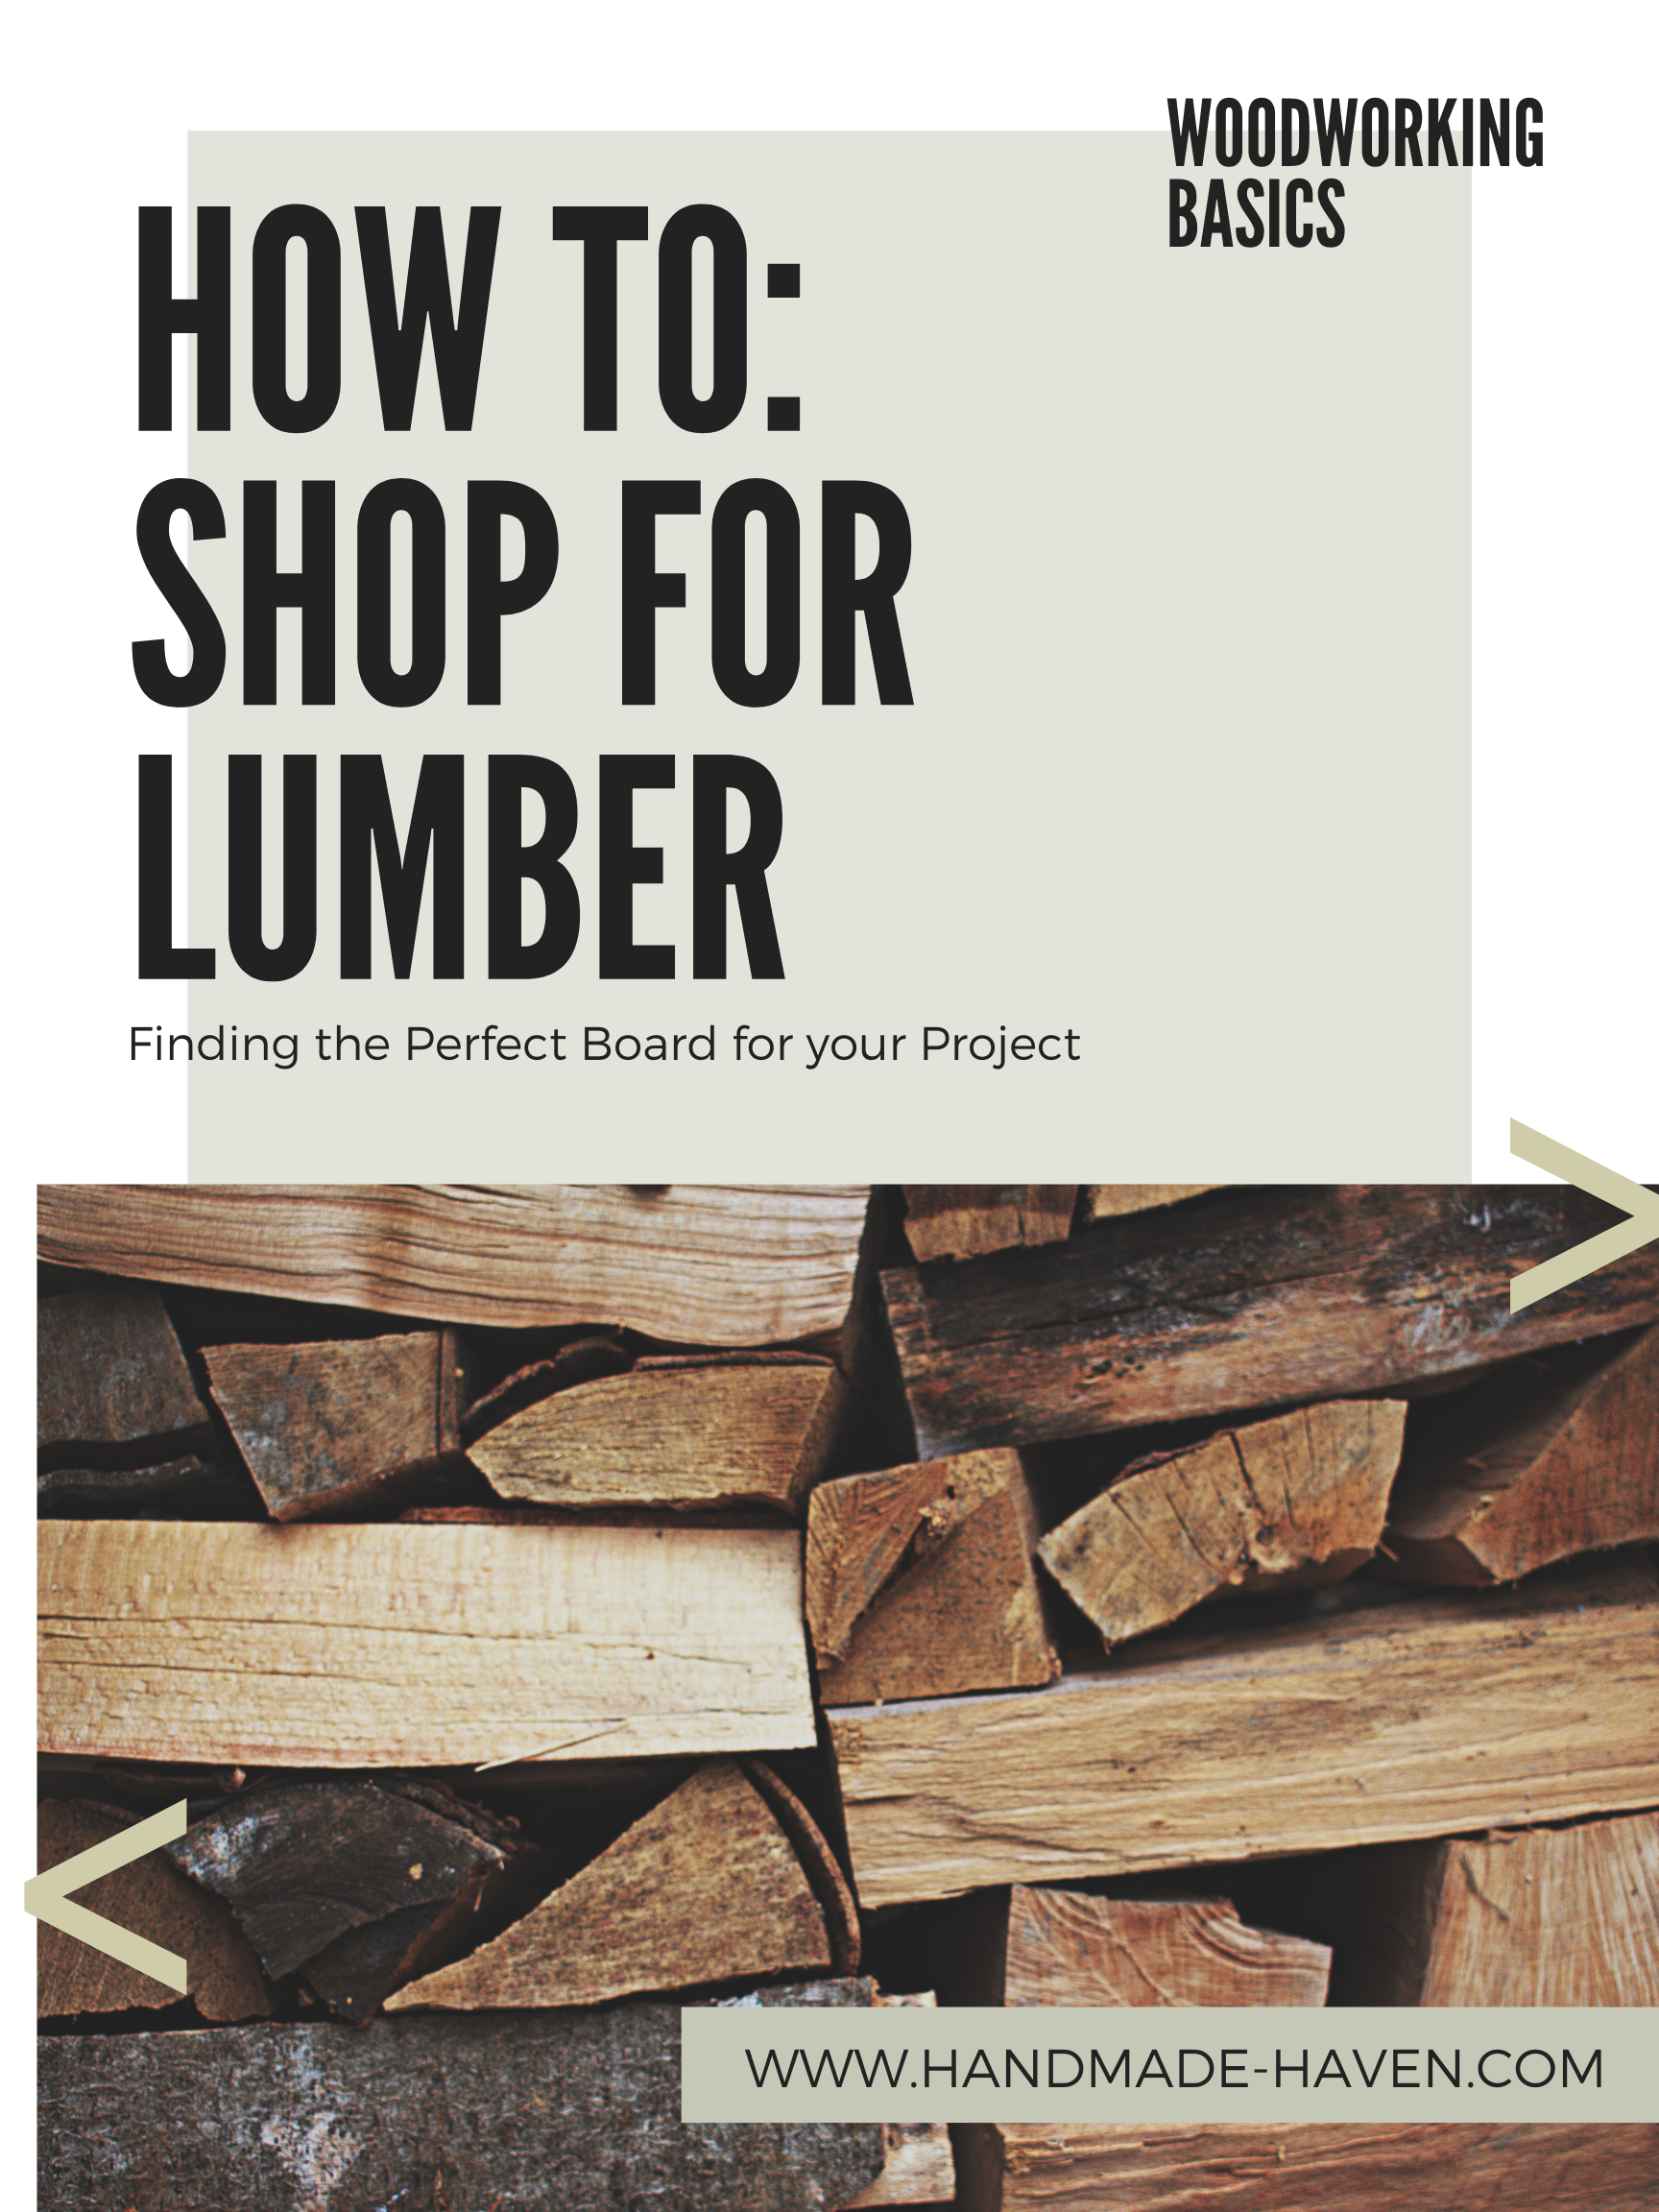 What to Know About Buying Hardwood Lumber for Your Woodworking